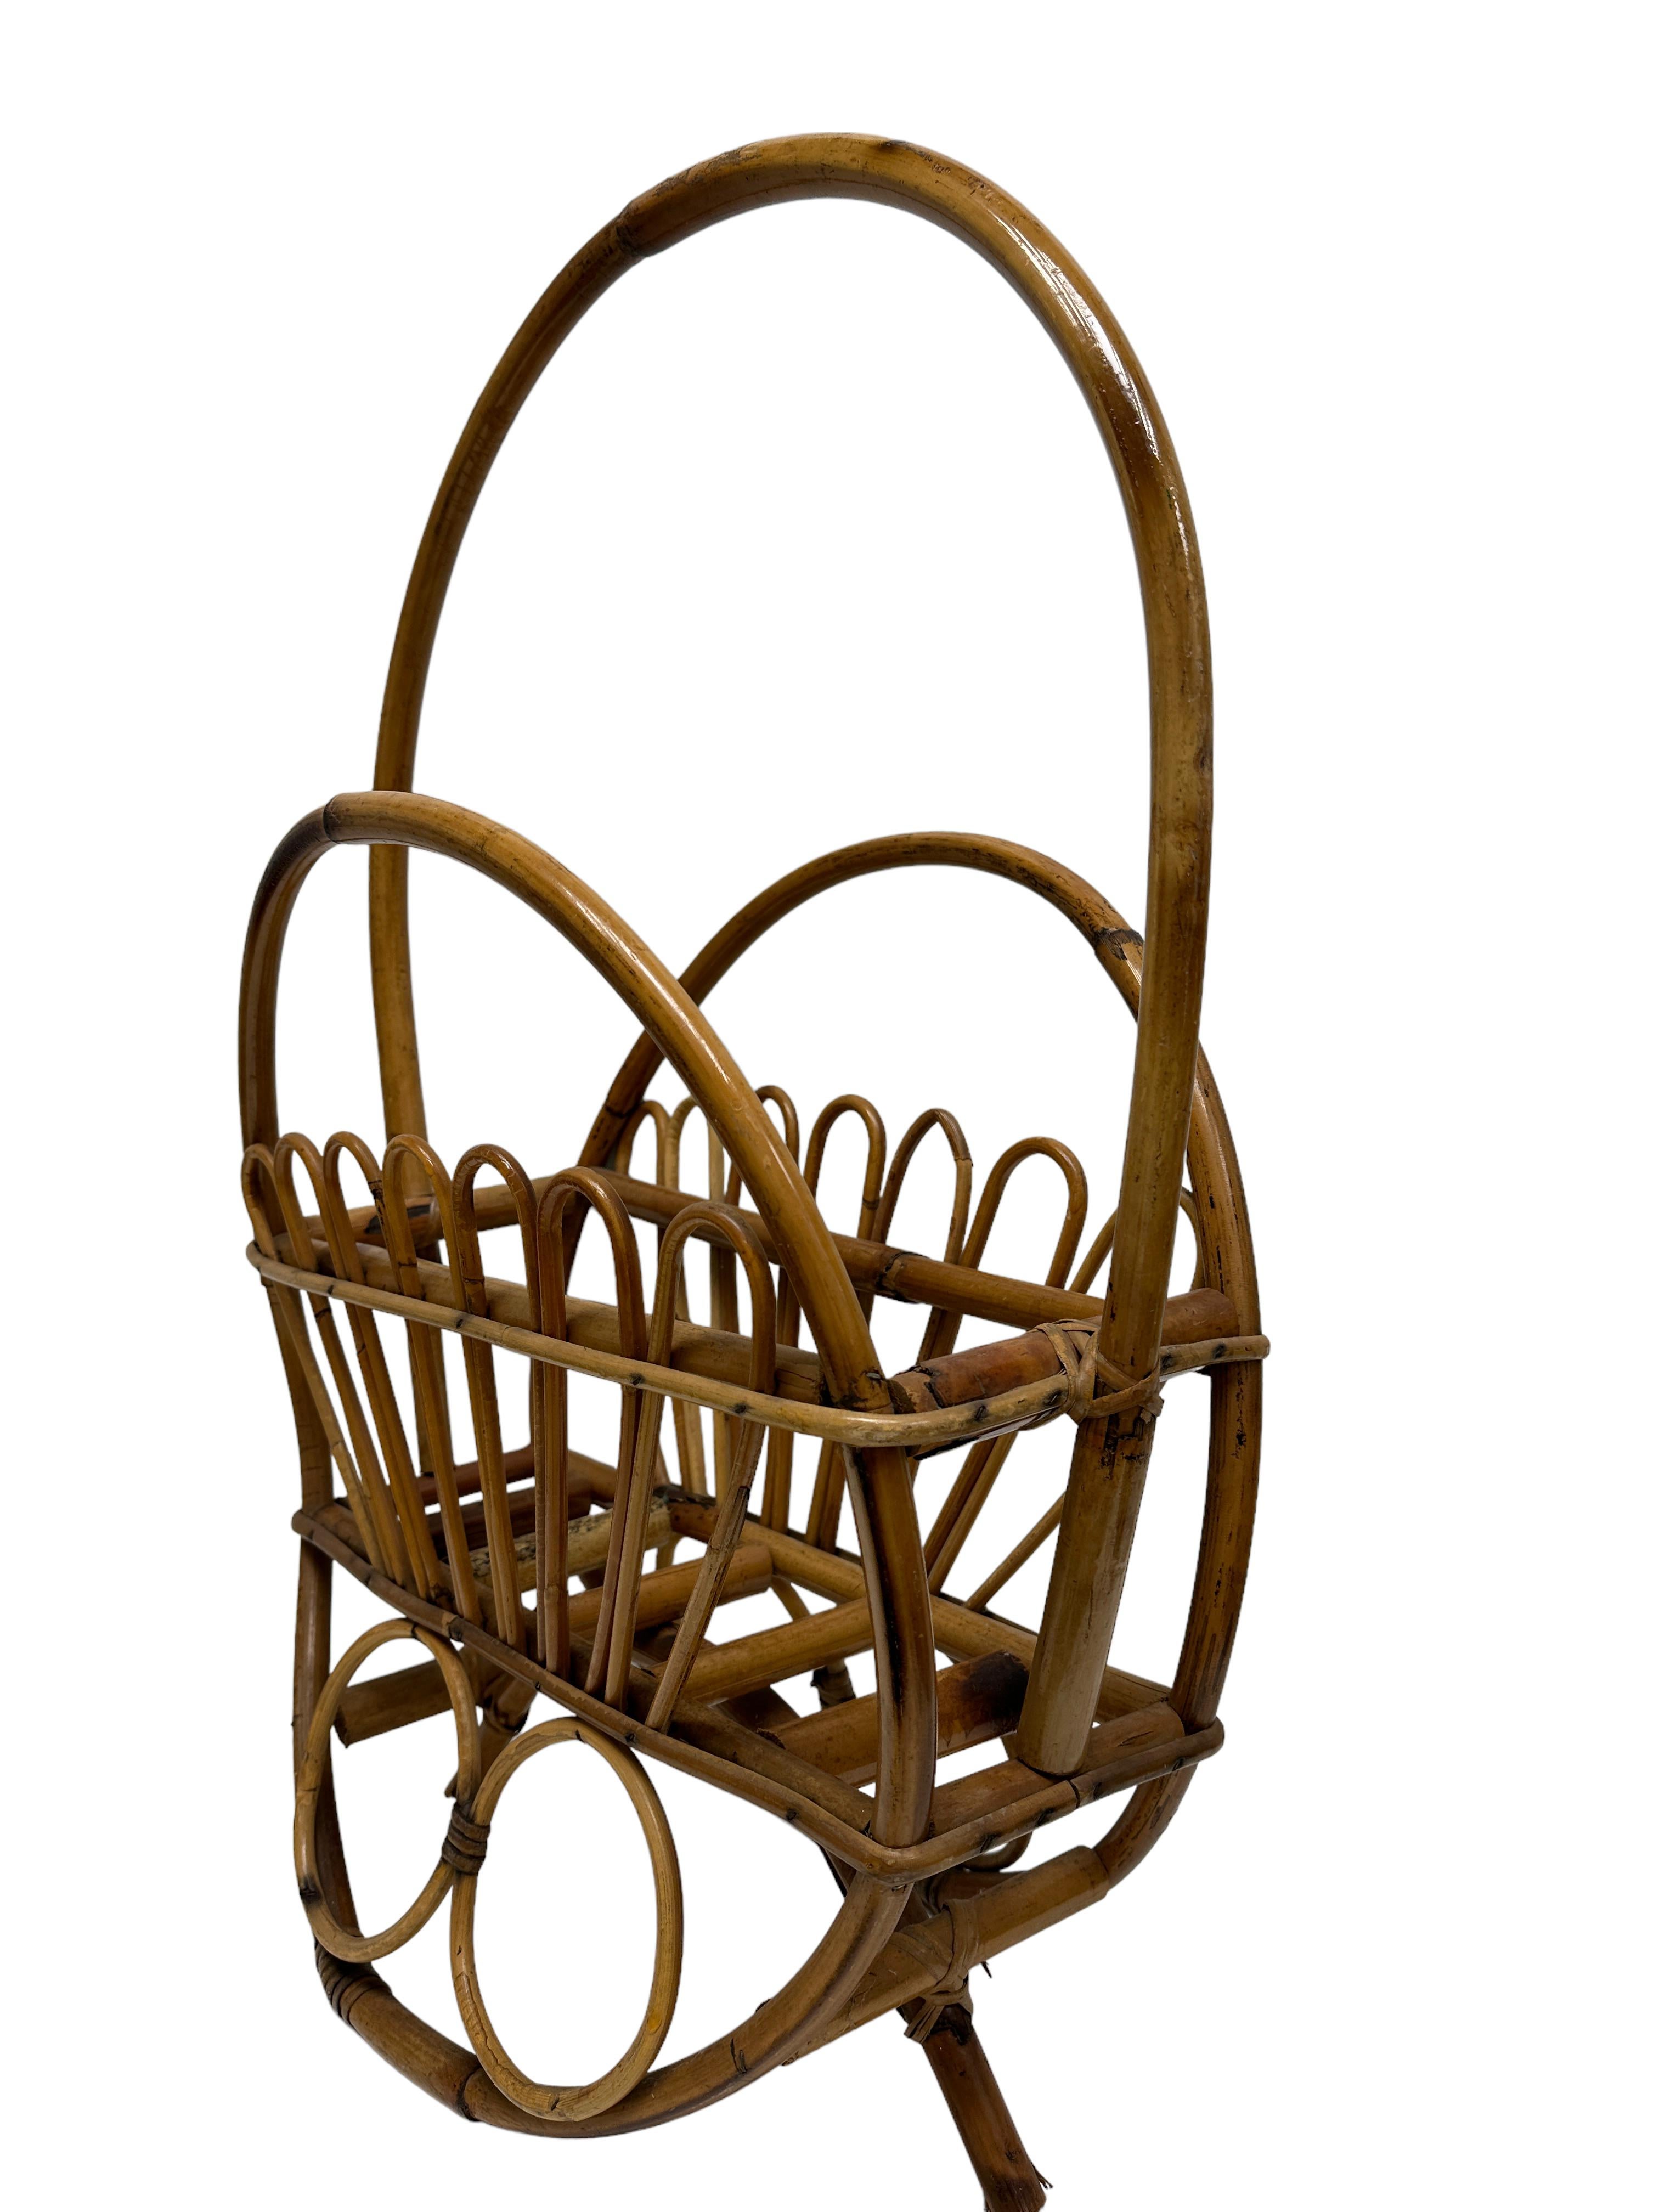 Offered is an absolutely stunning, 1970s Italian magazine rack stand. Original midcentury era. Minor patina gives this piece a classy statement. Attributed to Vivai Del Sud, fount at an Estate sale in Modena, Italy.